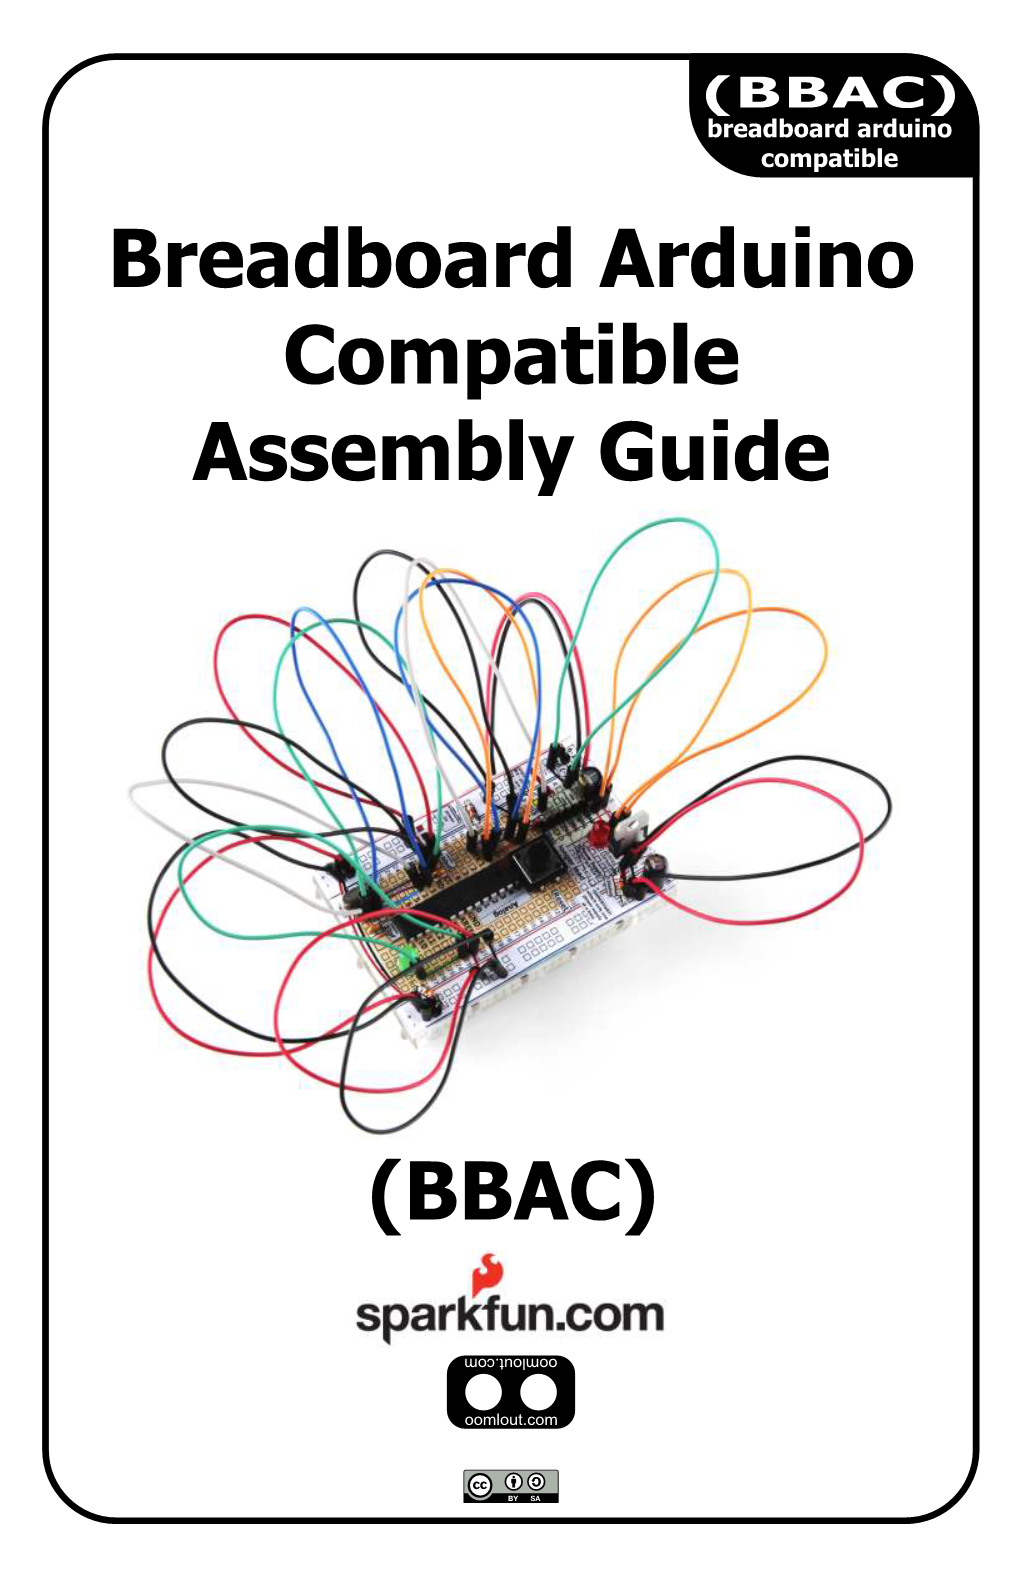 Breadboard Arduino Compatible Assembly Guide (BBAC)